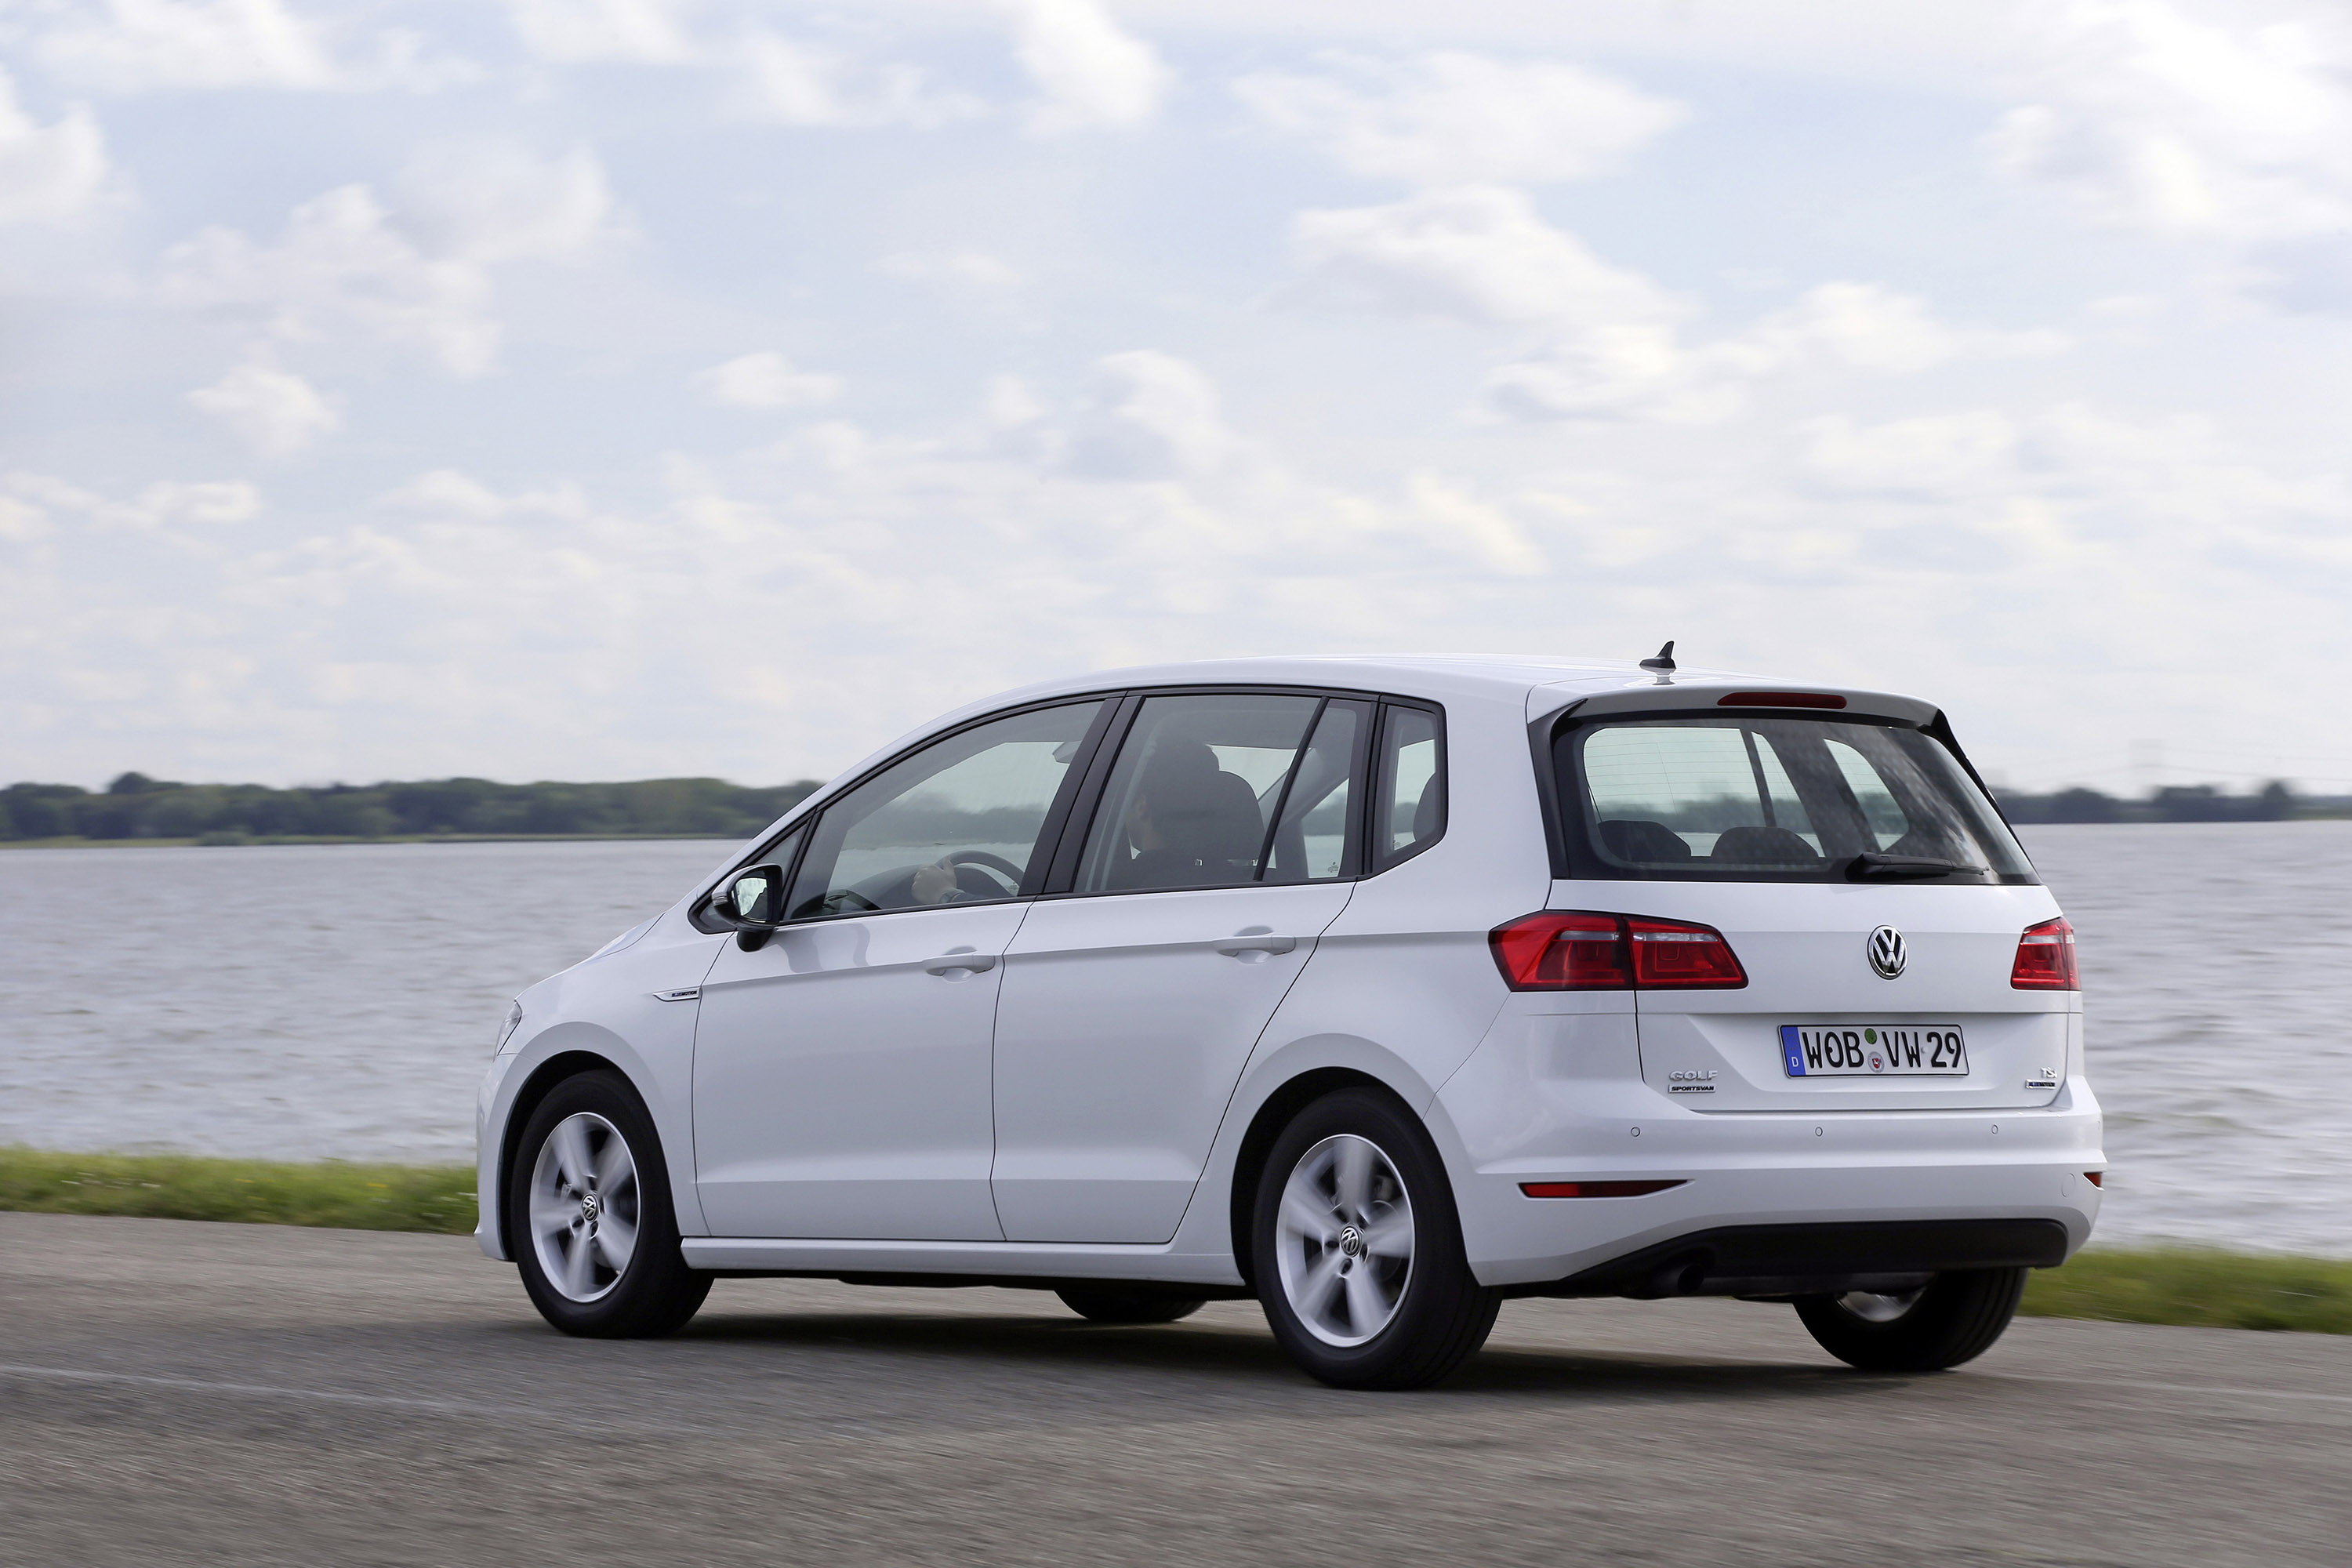 Golf Models With BlueMotion Engines